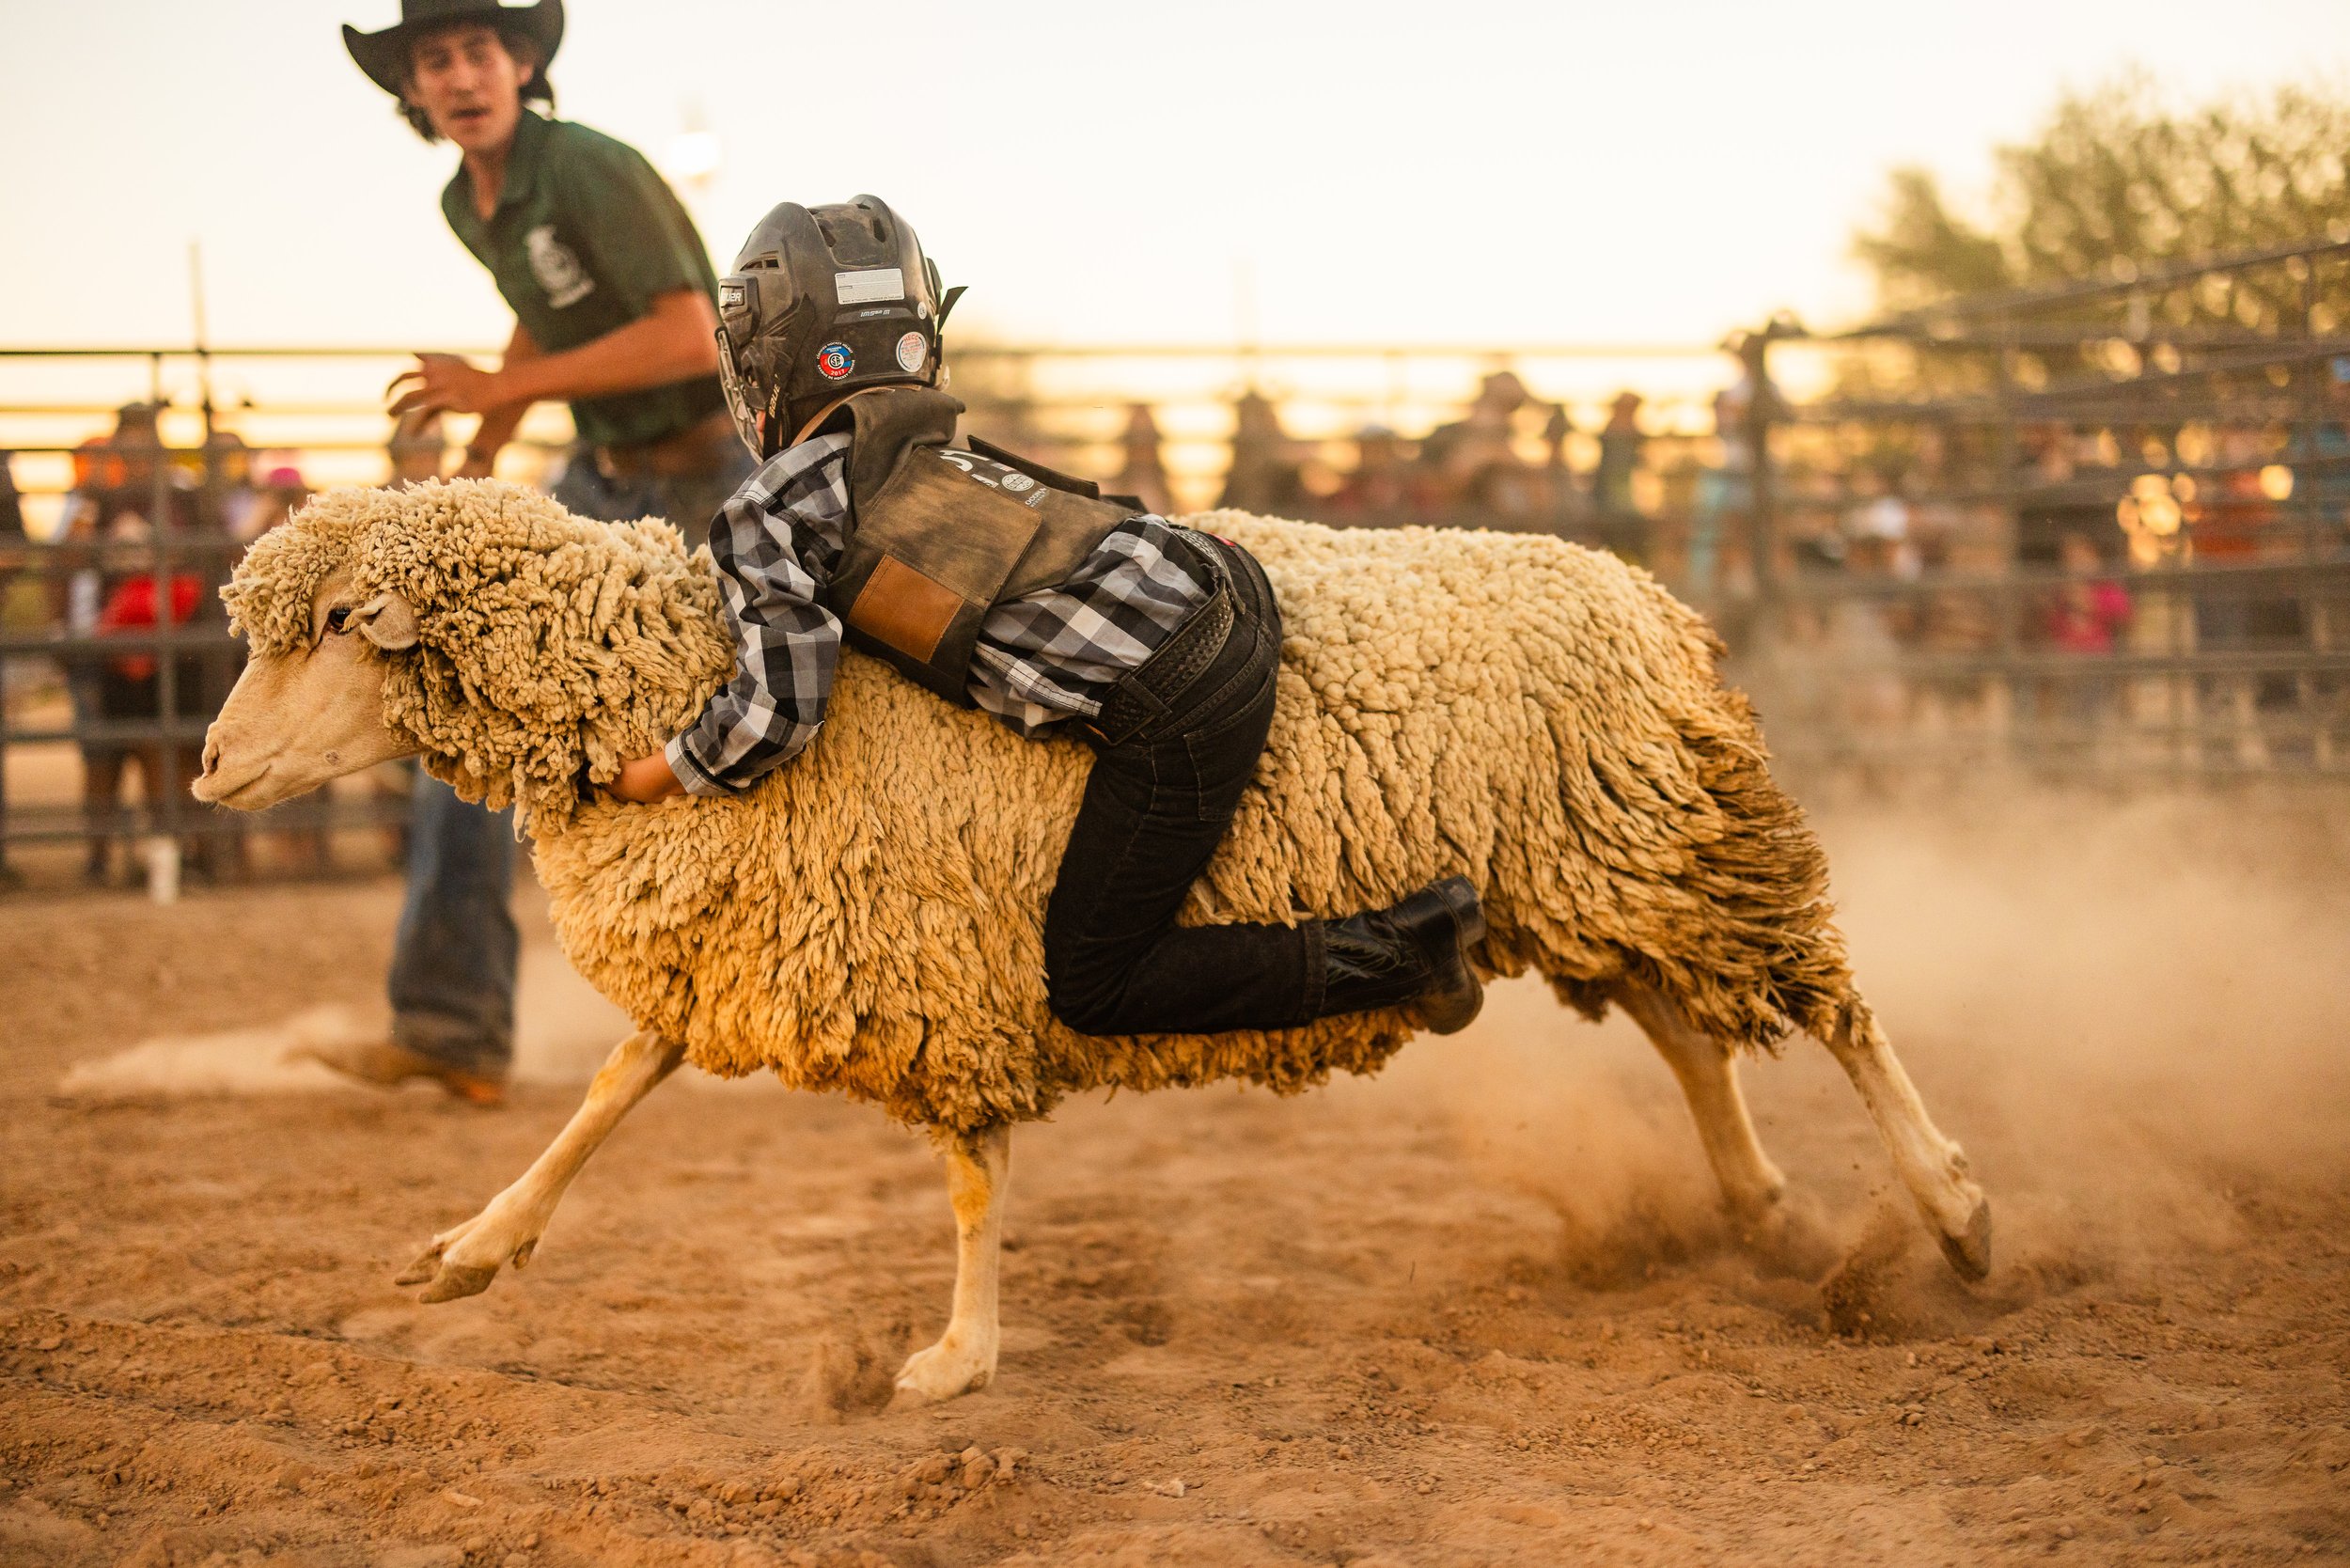  Mutton busting competitor 